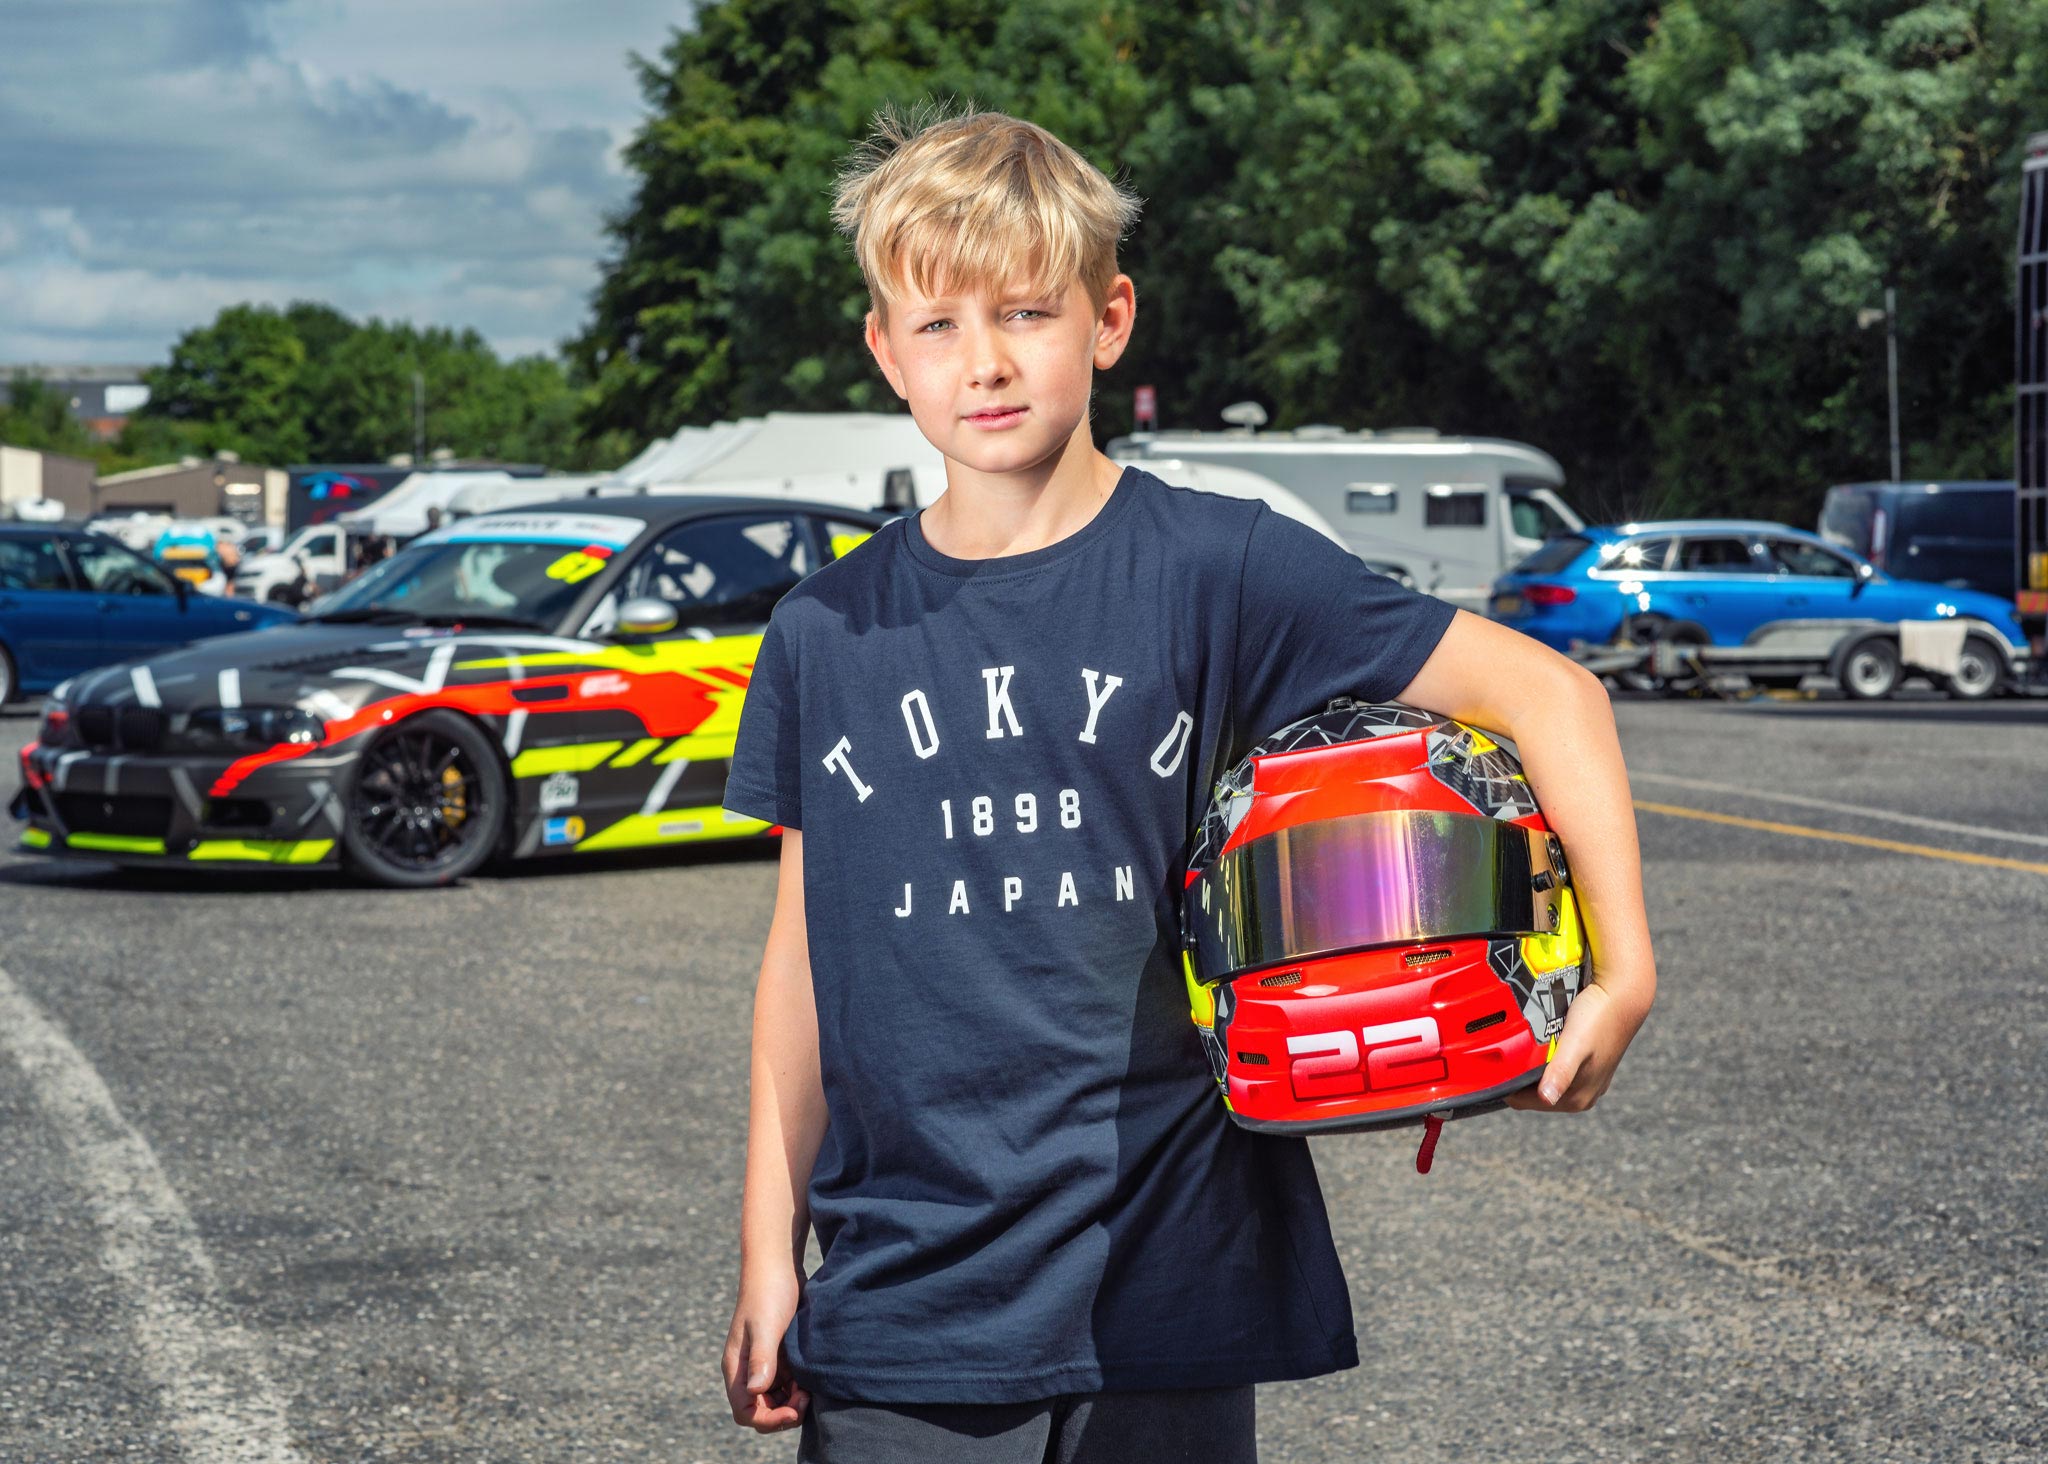 A boy poses for his portrait holding a race car driver's helmet during a track day event in motorsport. Captured by Wright Content, a family portraits photographer in London.